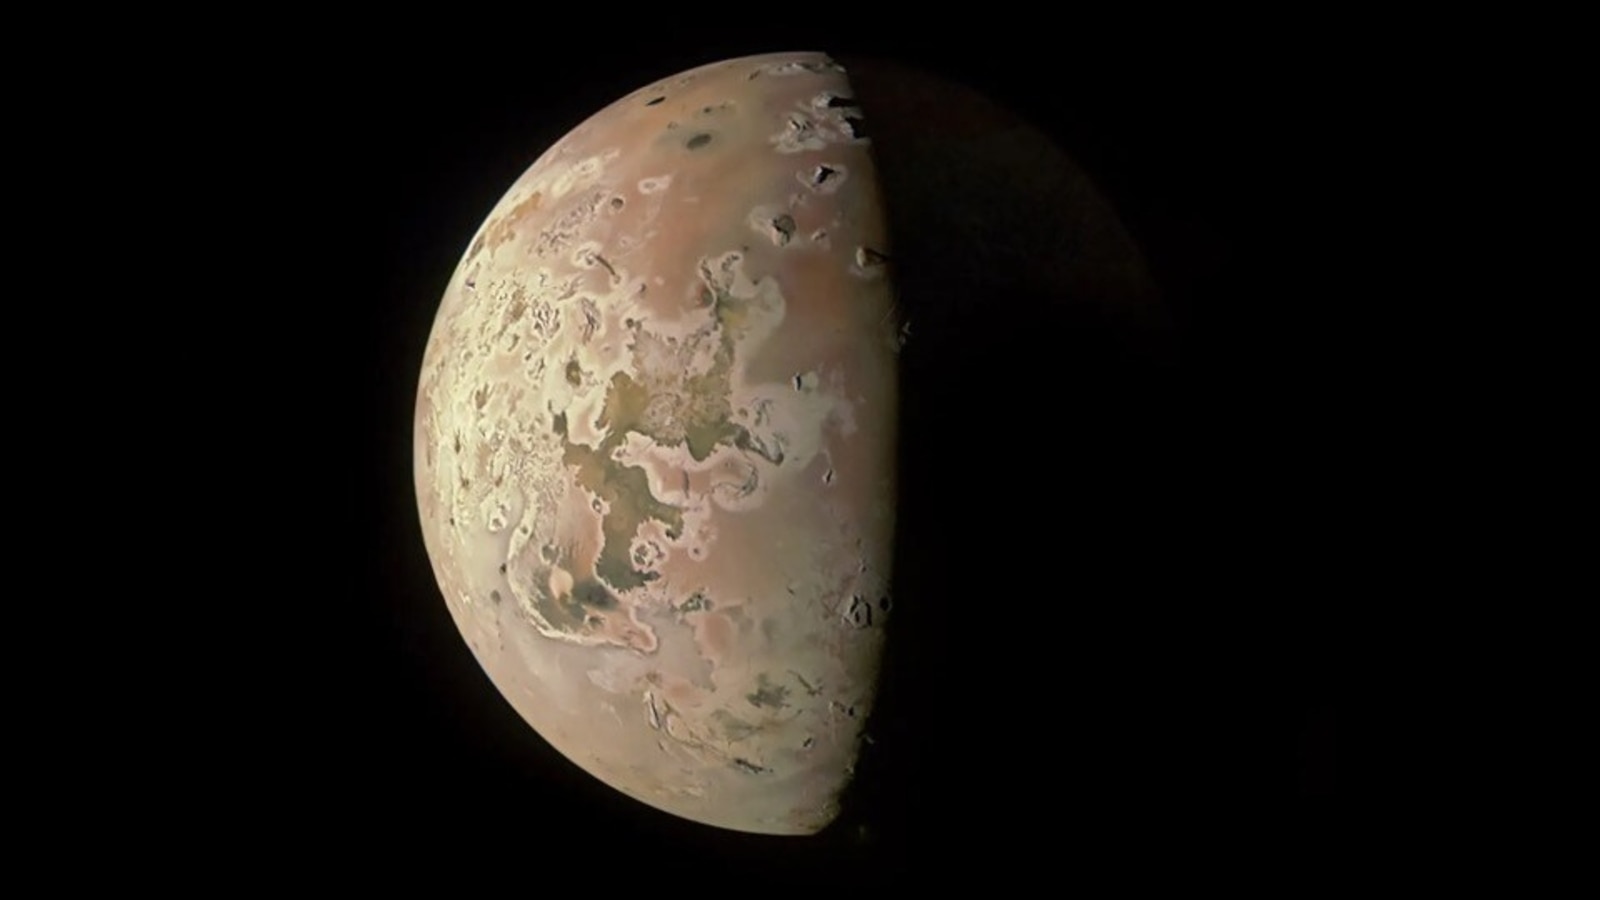 NASA’s Juno spacecraft captures mesmerizing picture of Jupiter’s moon Io; Know what specialists stated